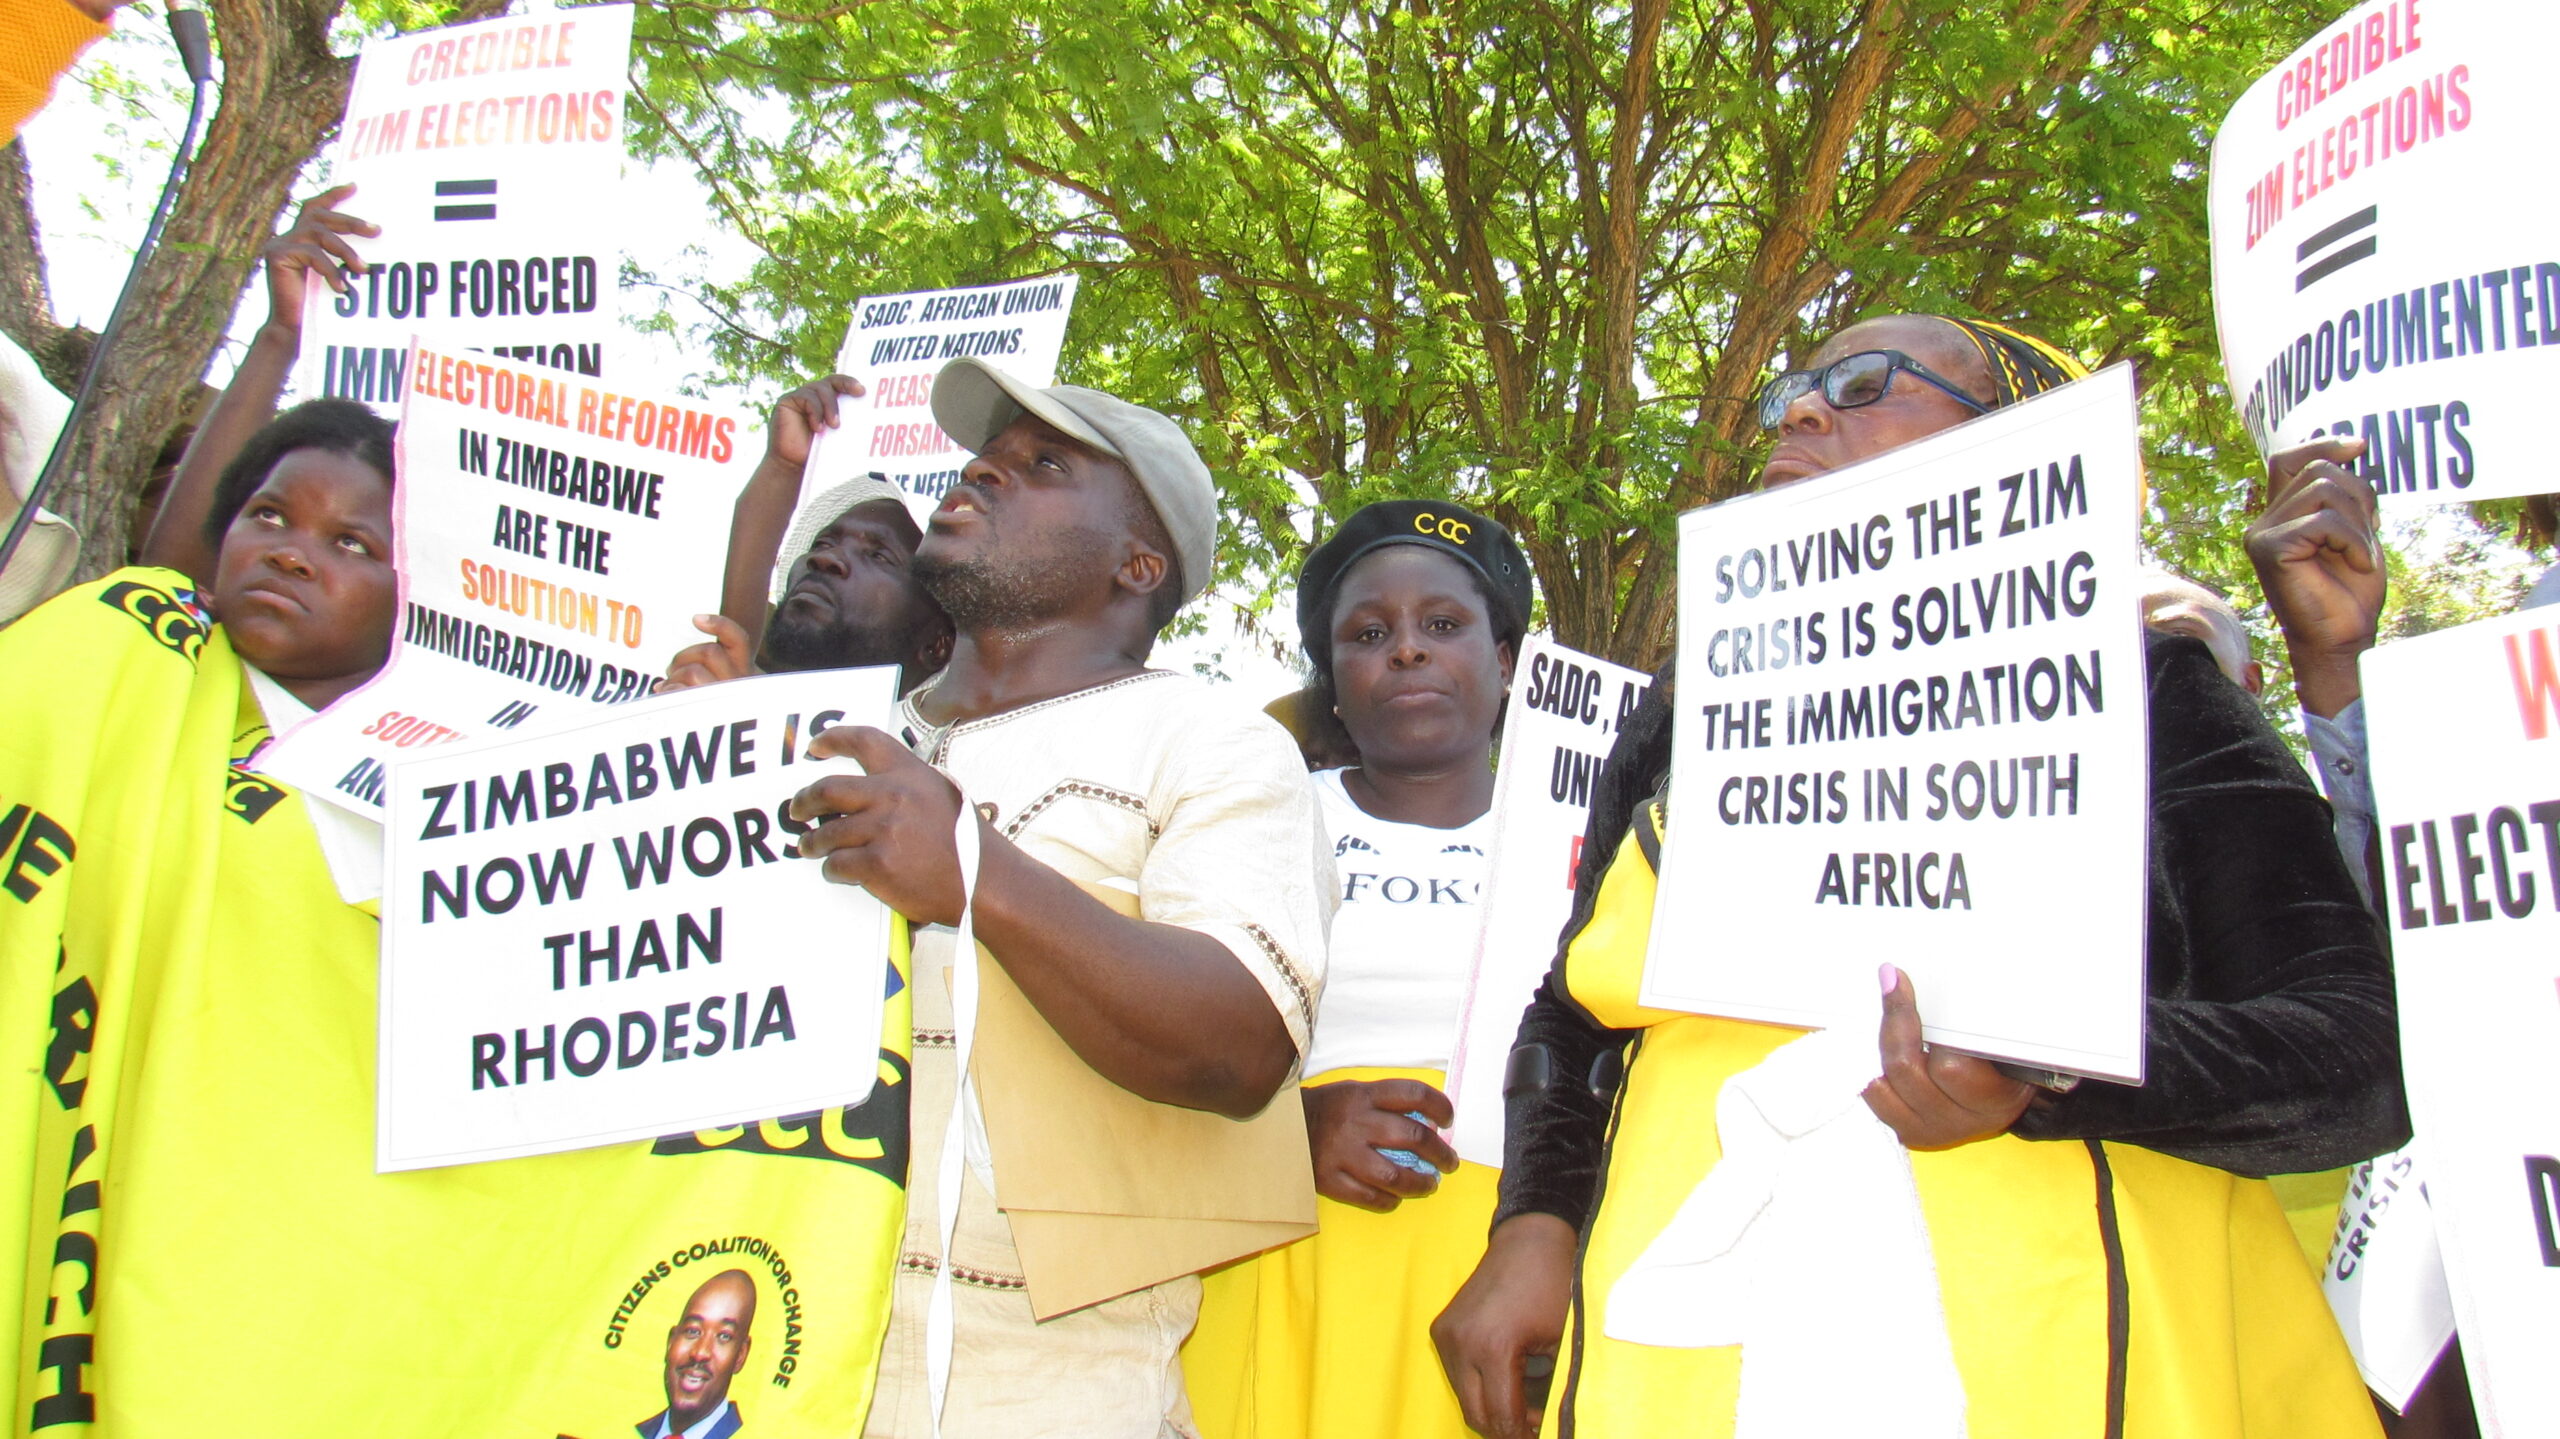 Concern Zimbabwe living in South Africa marching at DIRCO in Pretoria on Tuesday